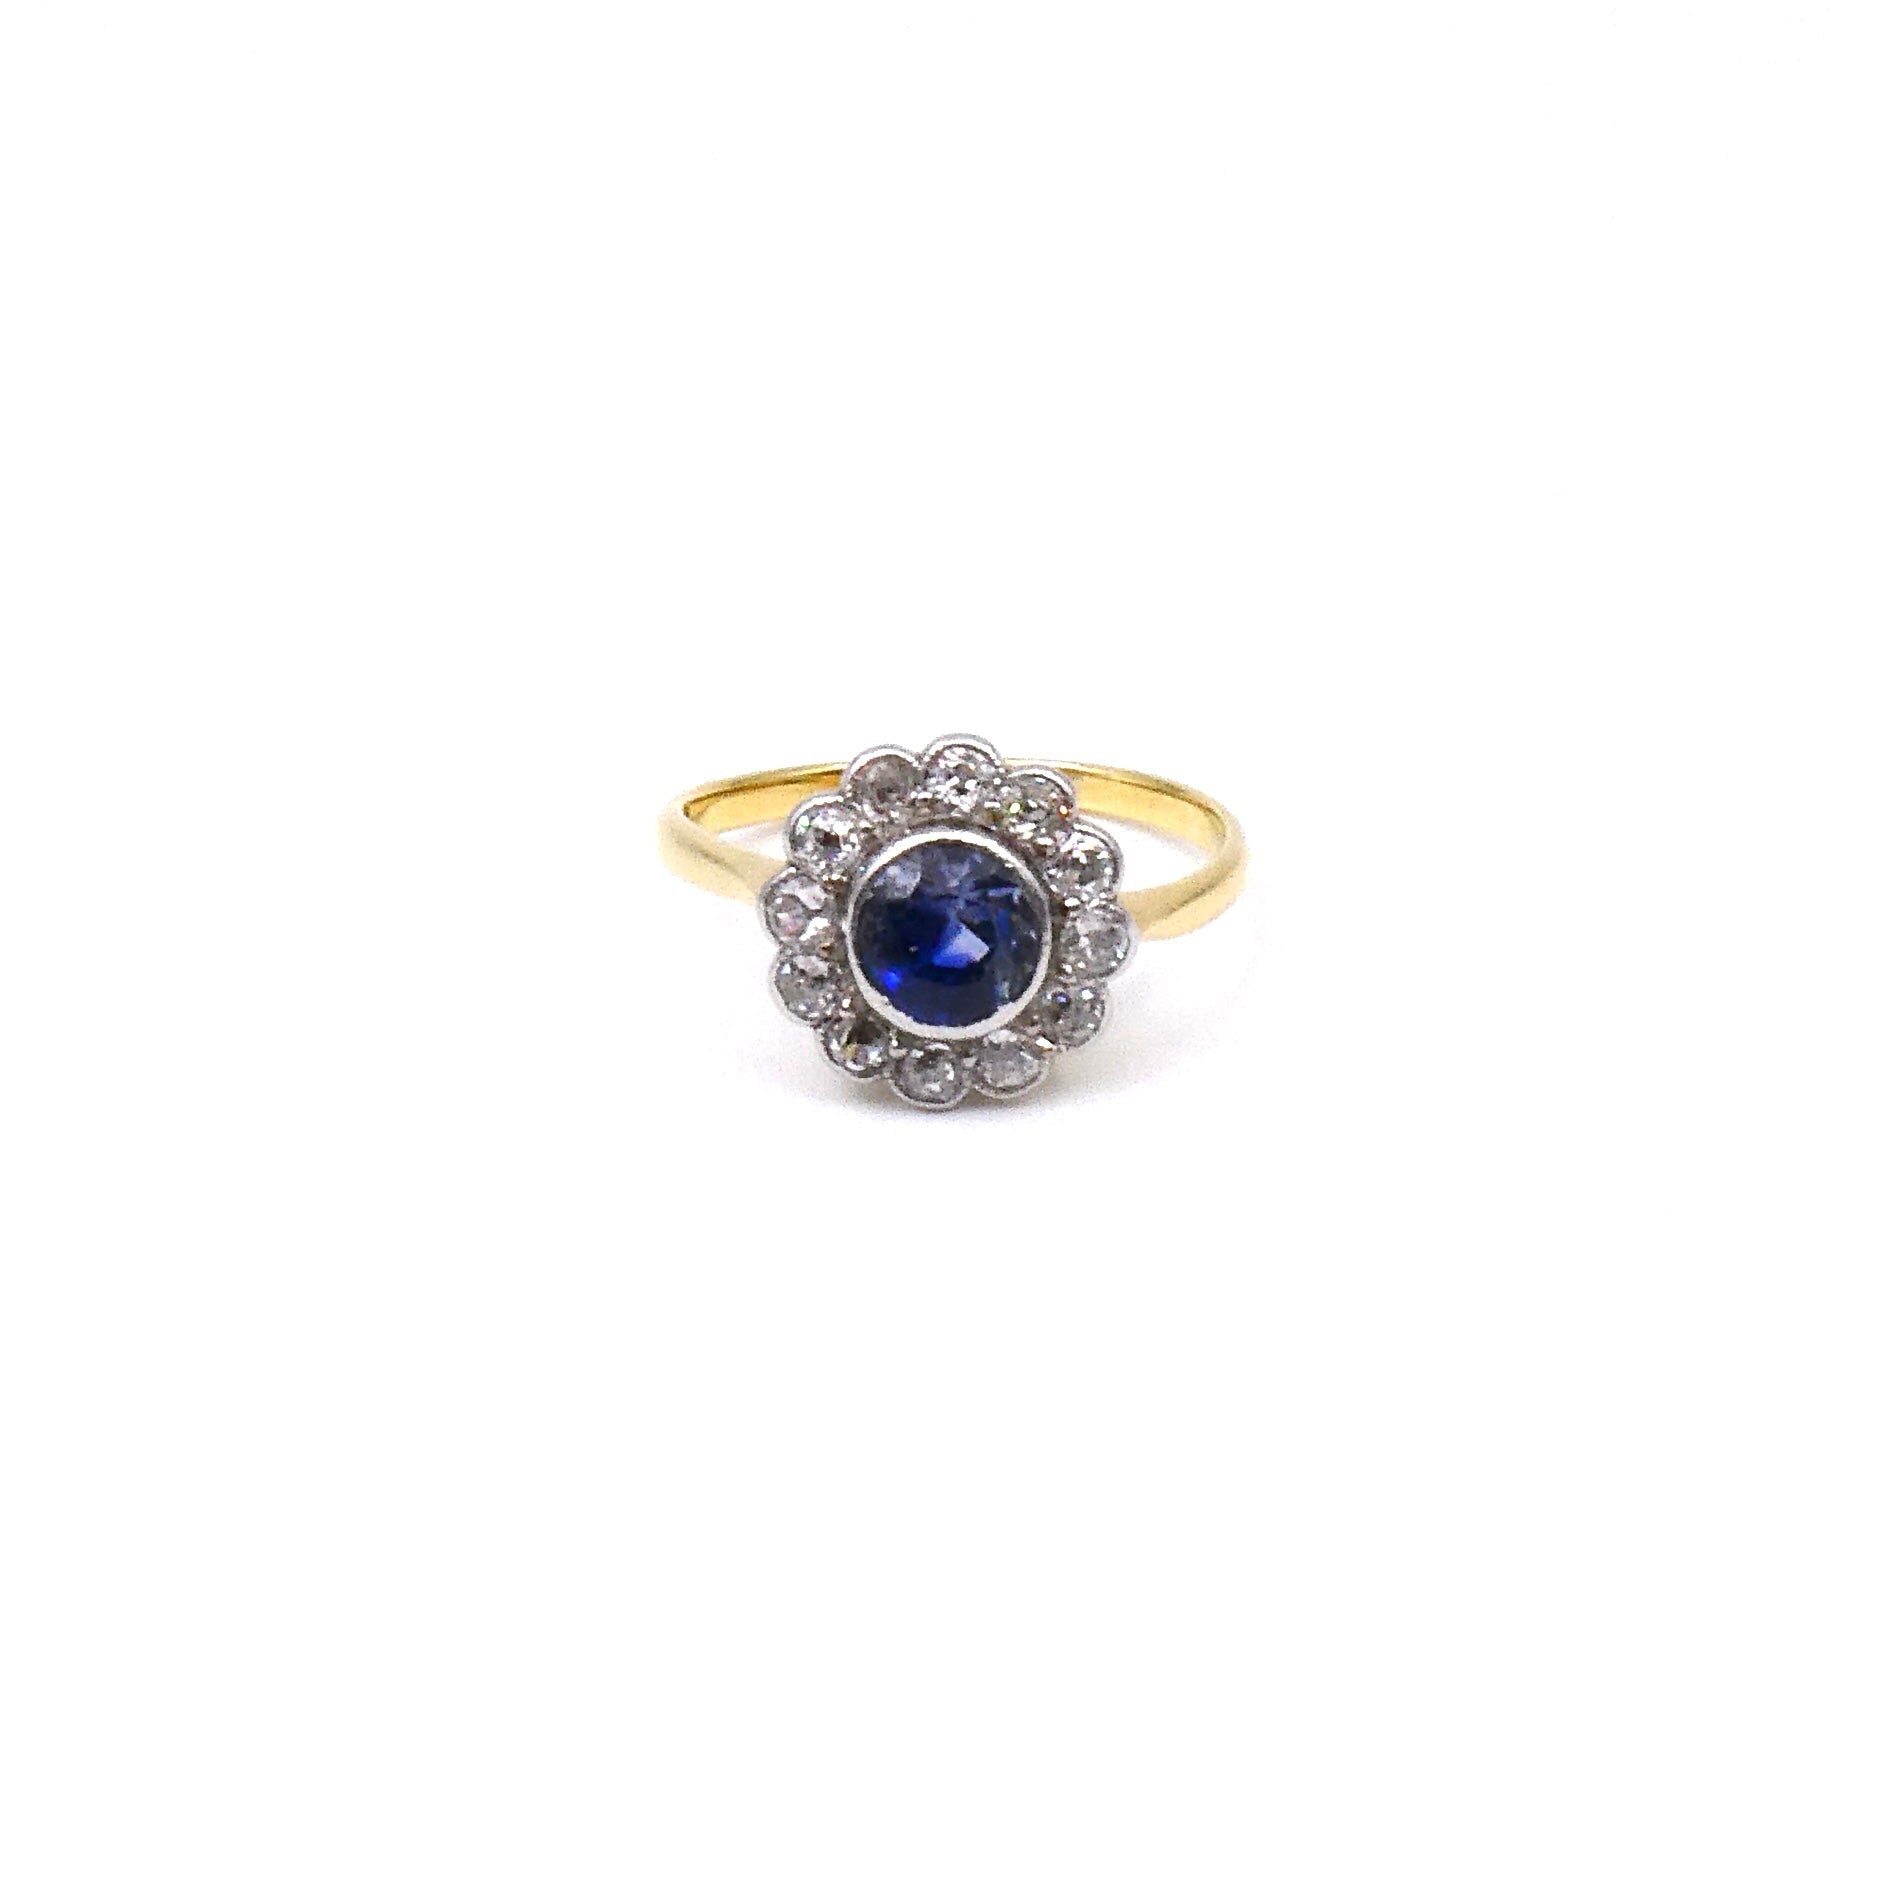 Antique sapphire daisy ring, 18kt cluster sapphire ring with old european cut diamonds and a sapphire. - Collected